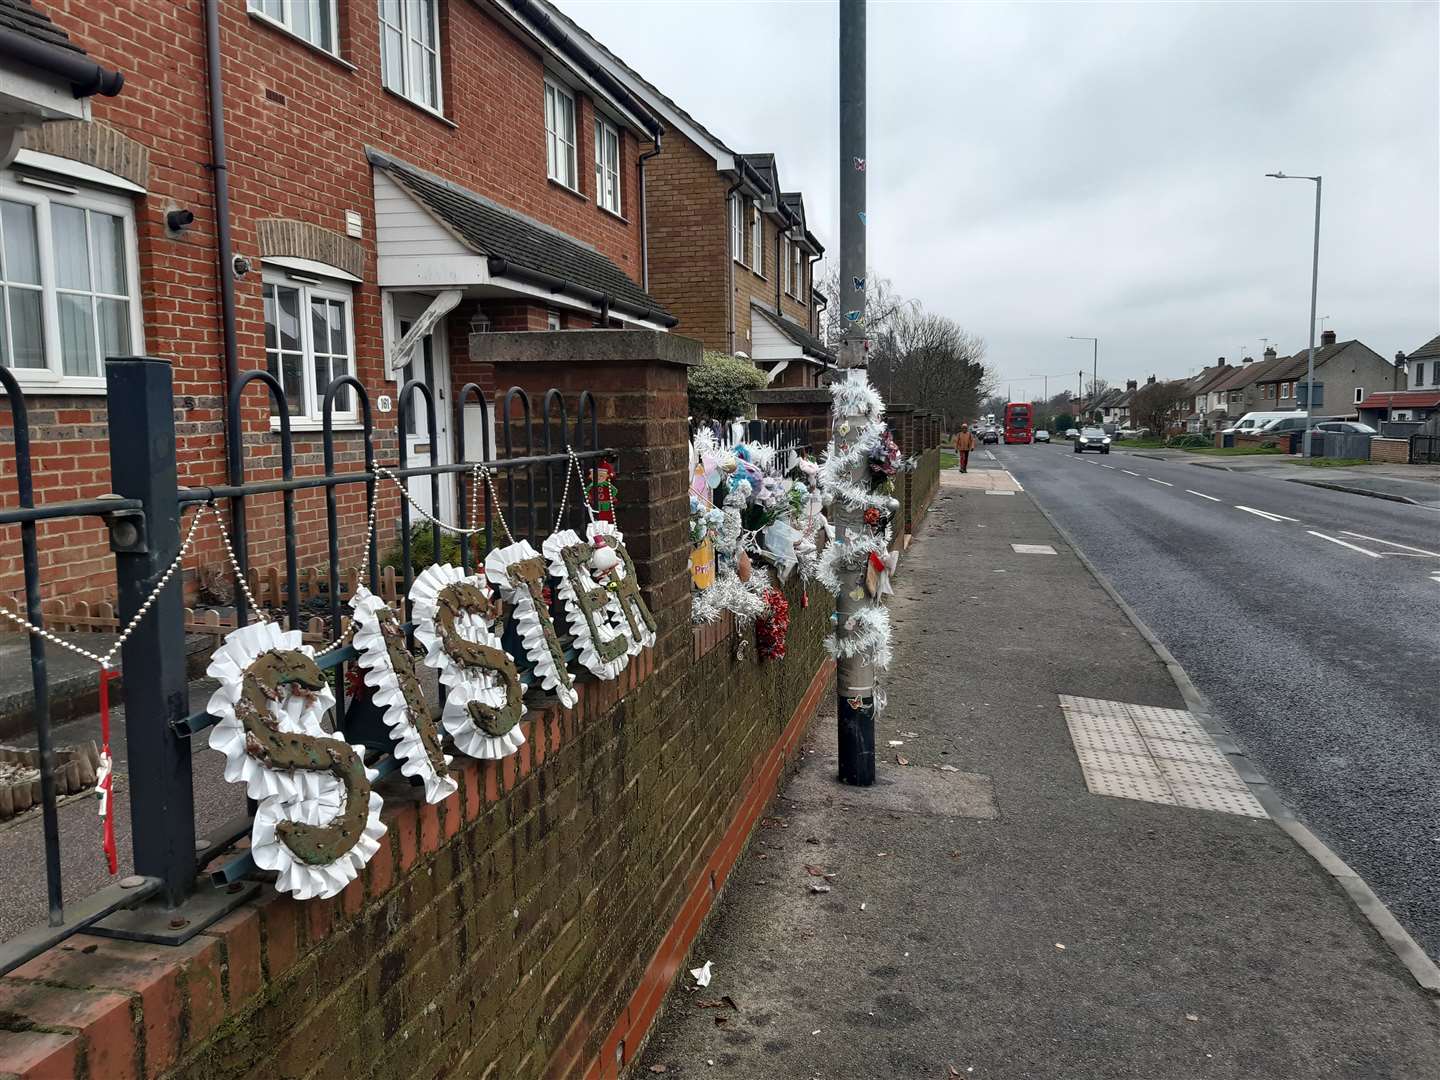 Tributes close to the scene where a ten-year-old girl was killed on Watling Street. Photo: Sean Delaney